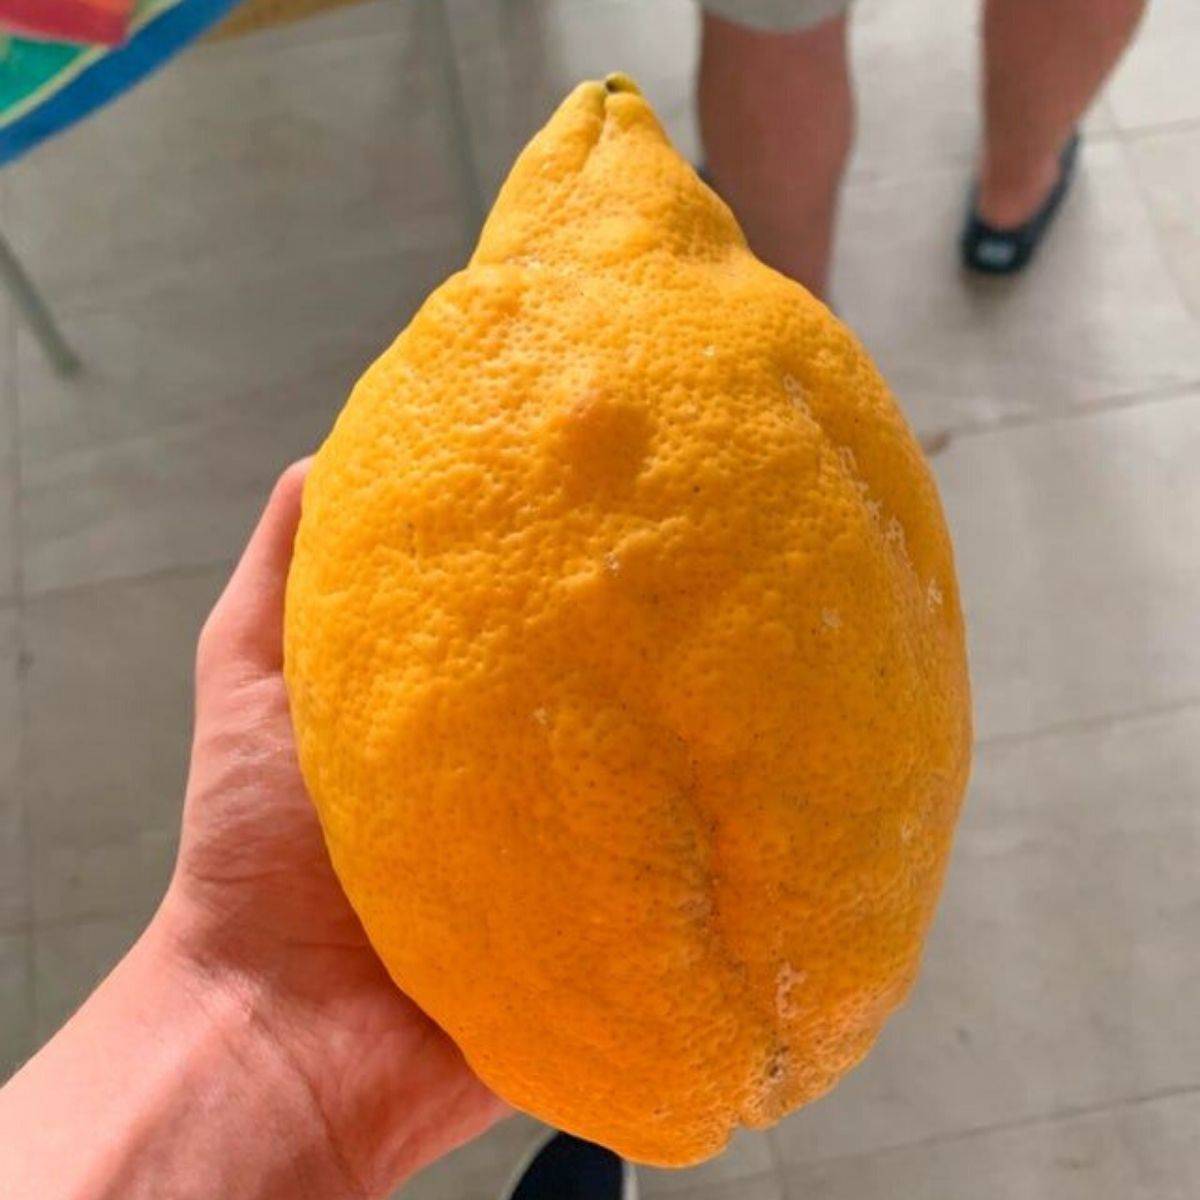 <p>For some unknown reason, someone managed to grow this giant lemon in their backyard, which came from a tree of completely regular-sized lemons. </p> <p>This guy must have got the most sunlight.</p>